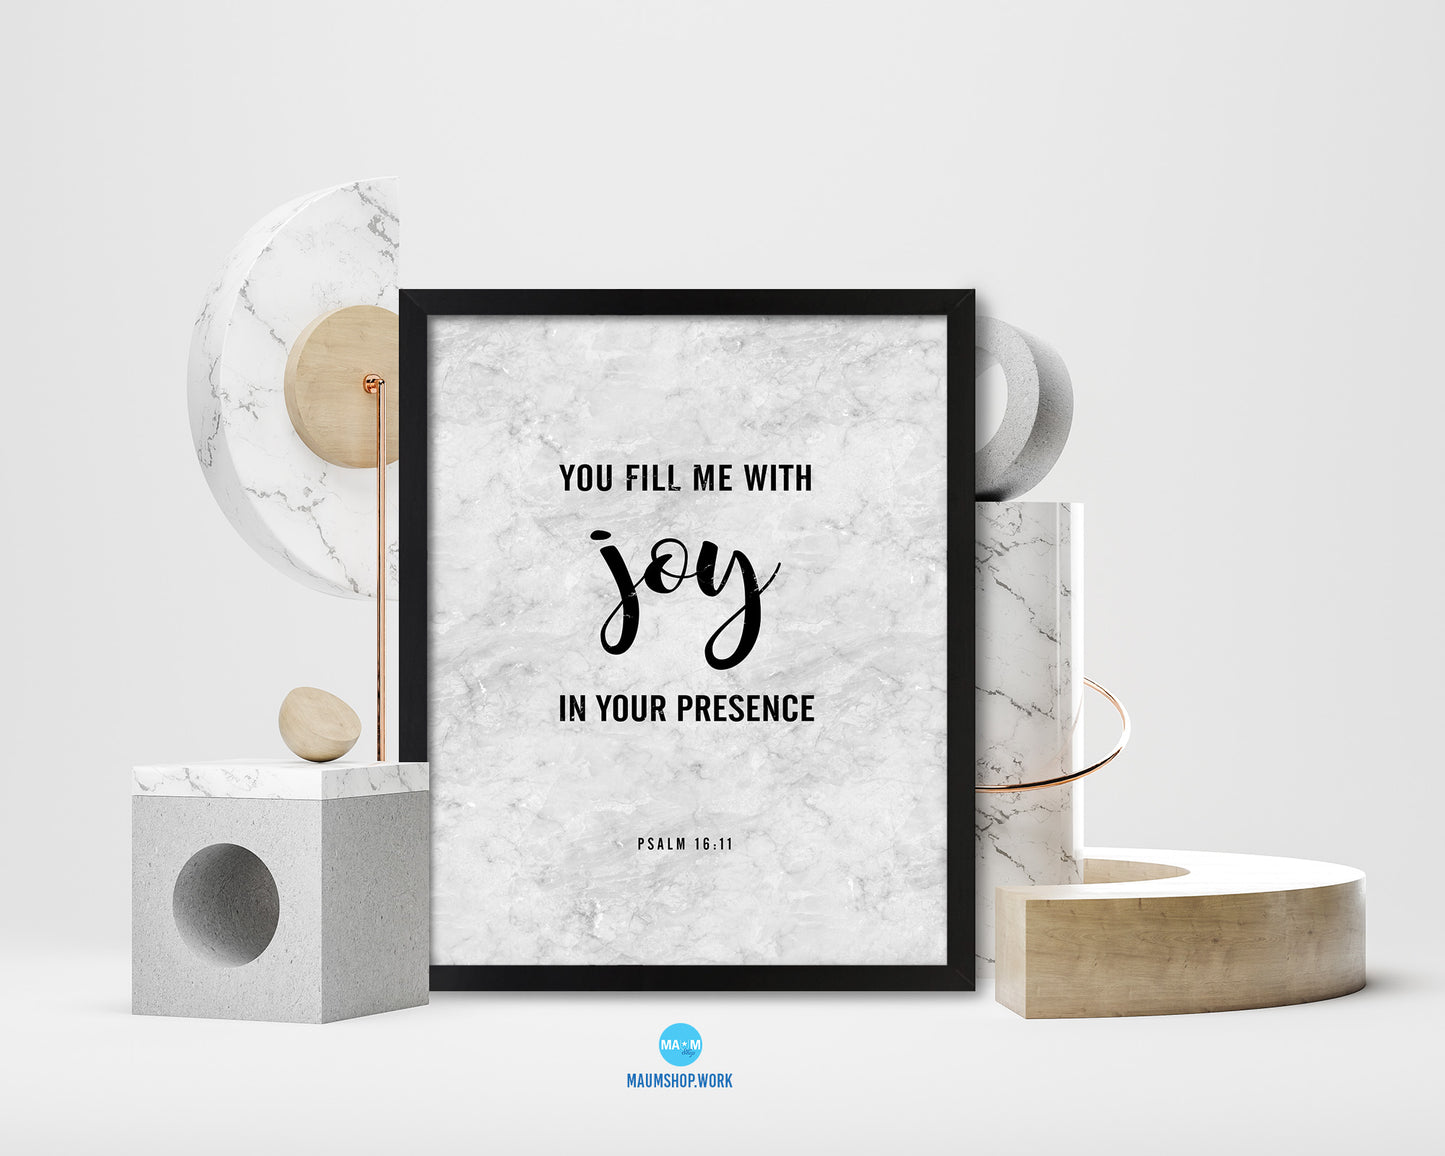 You fill me with joy in your presence, Psalm 16:11 Bible Scripture Verse Framed Art